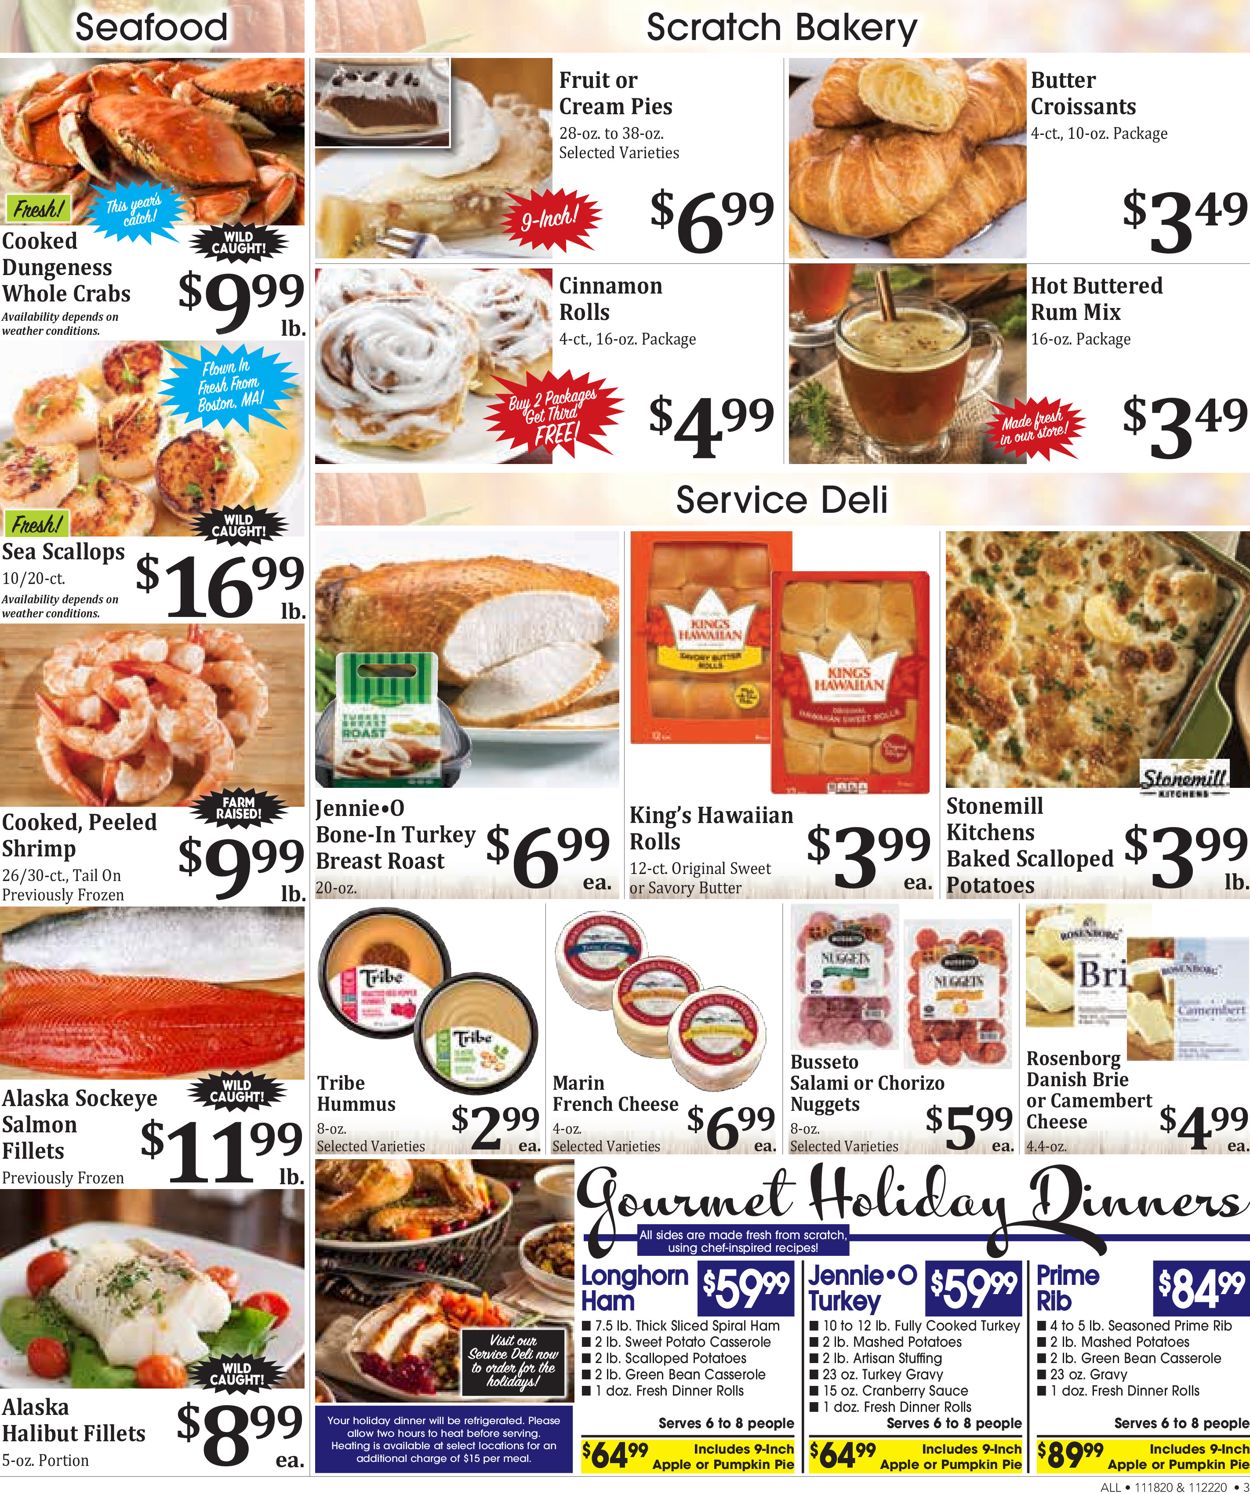 Catalogue Rosauers Thanksgiving 2020 from 11/18/2020